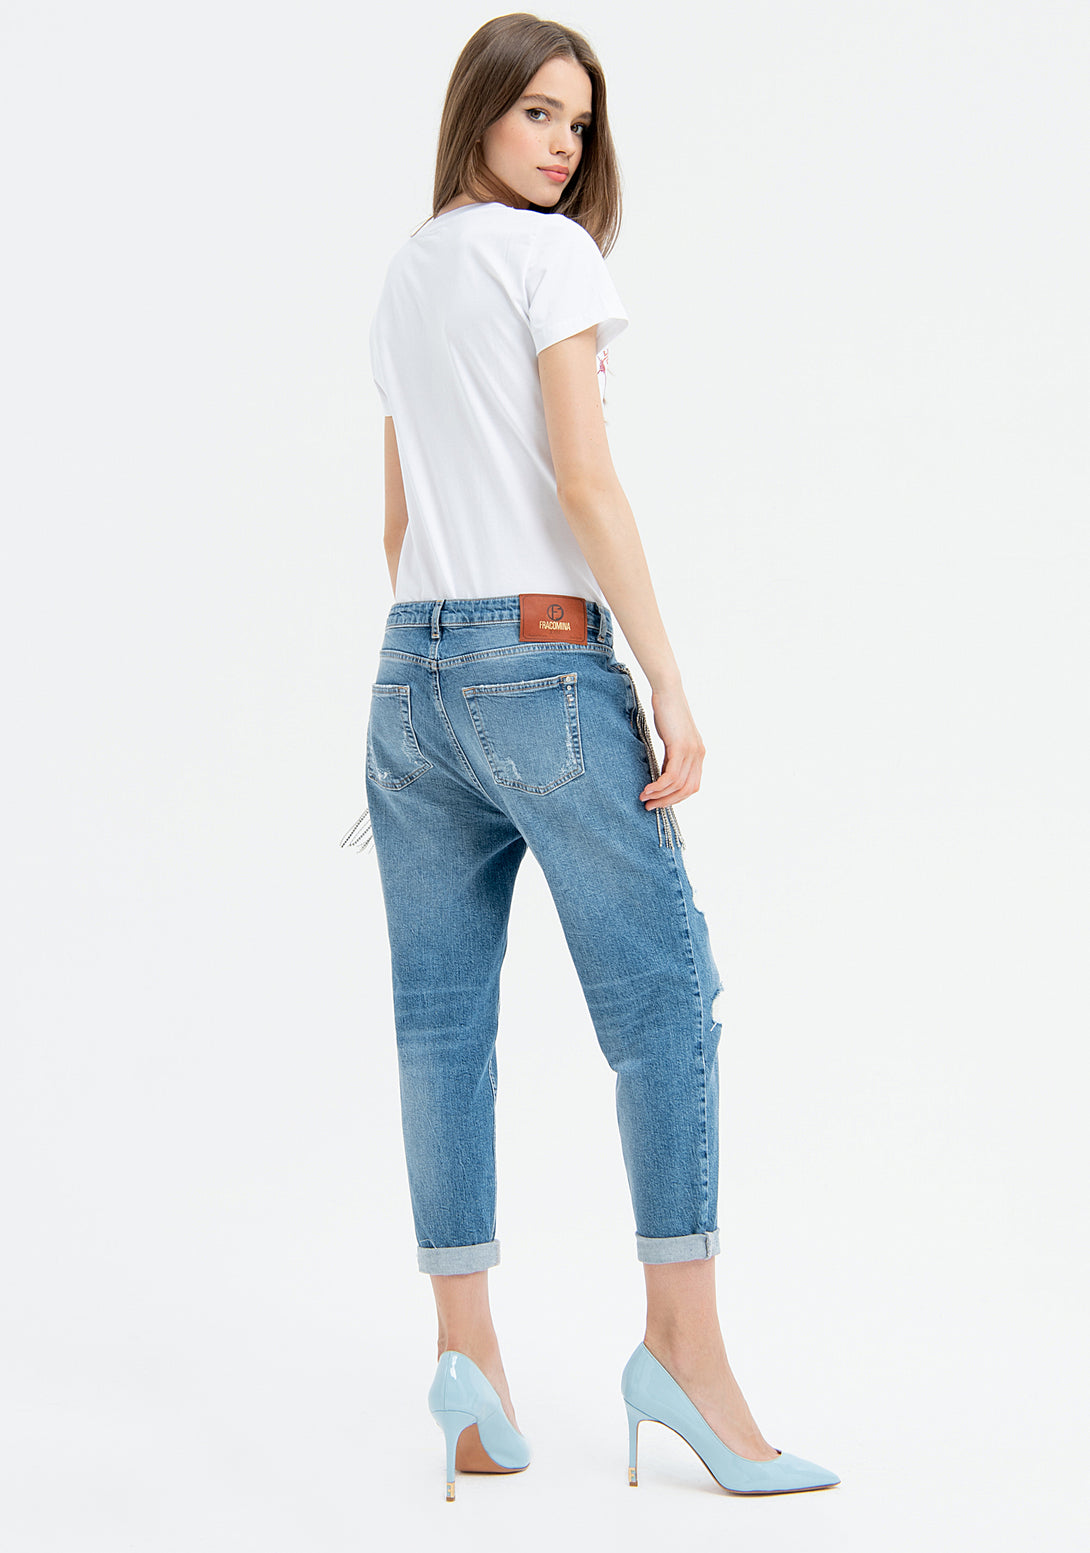 Jeans boyfriend fit made in denim with light wash Fracomina FP23SV5002D419O6-430-3